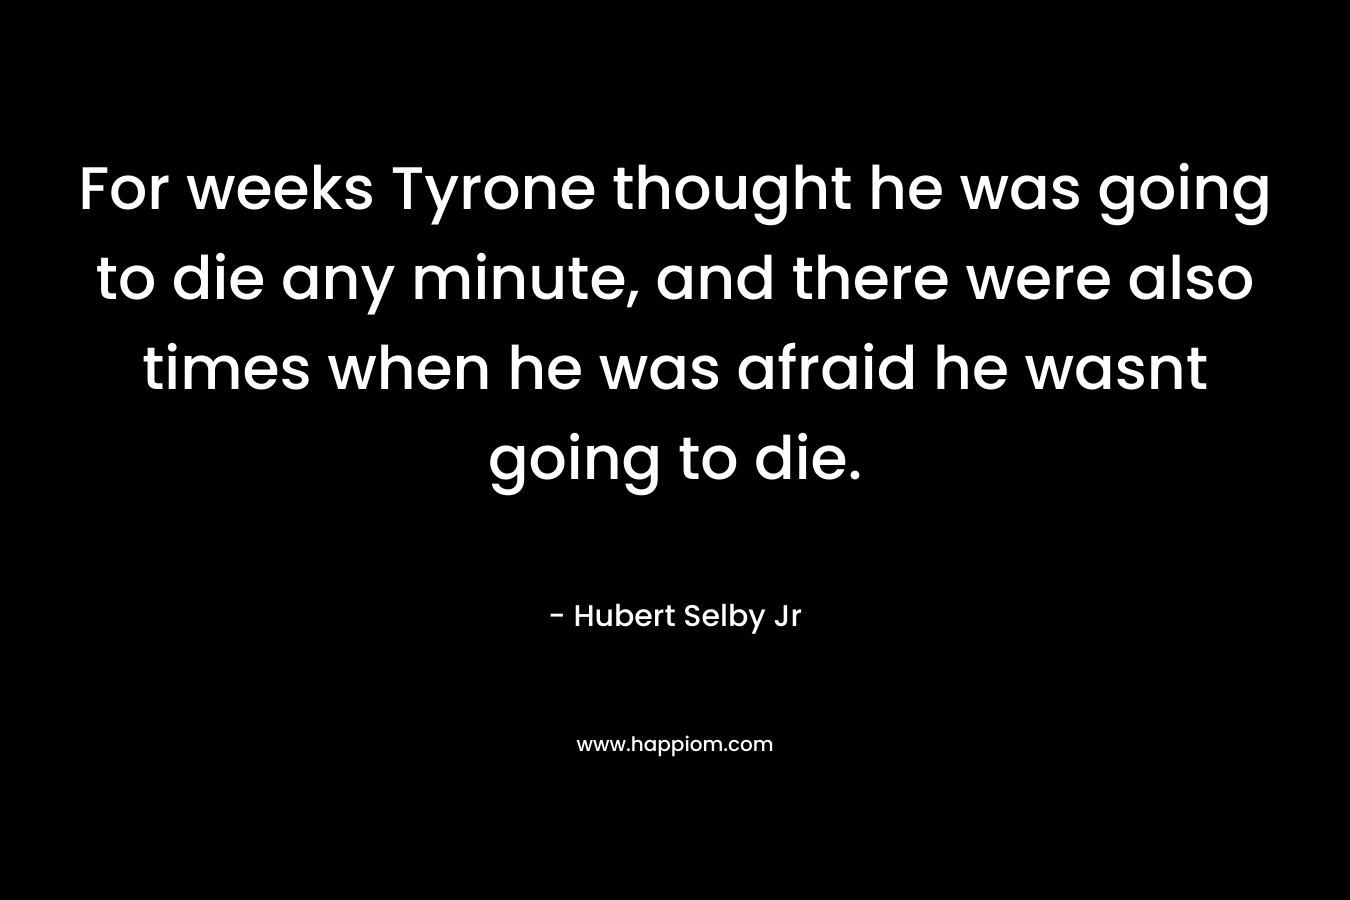 For weeks Tyrone thought he was going to die any minute, and there were also times when he was afraid he wasnt going to die.